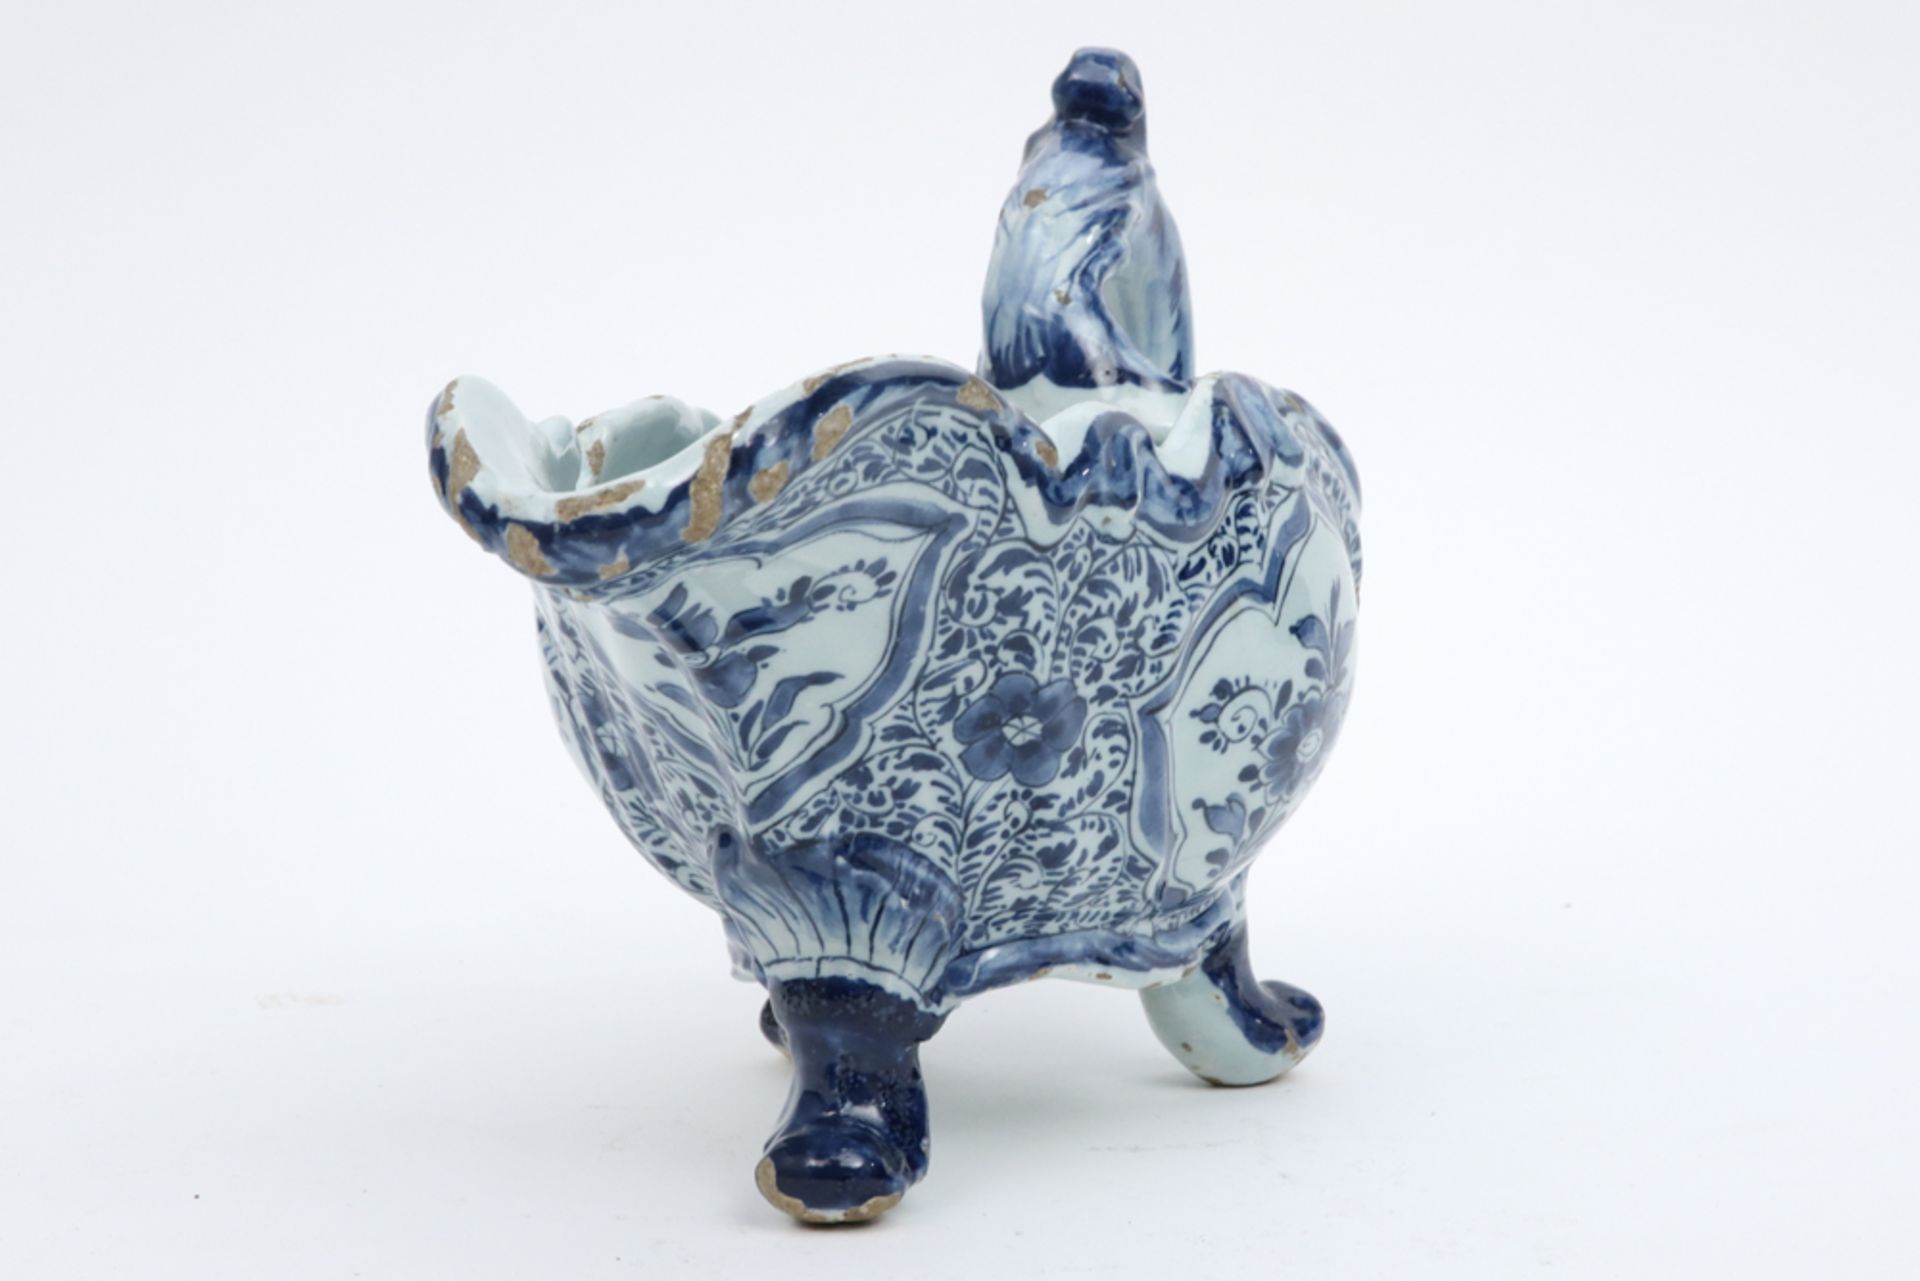 18th Cent. sauce boat in marked ceramic from Delft with a blue-white decor || Achttiende eeuwse - Bild 3 aus 4